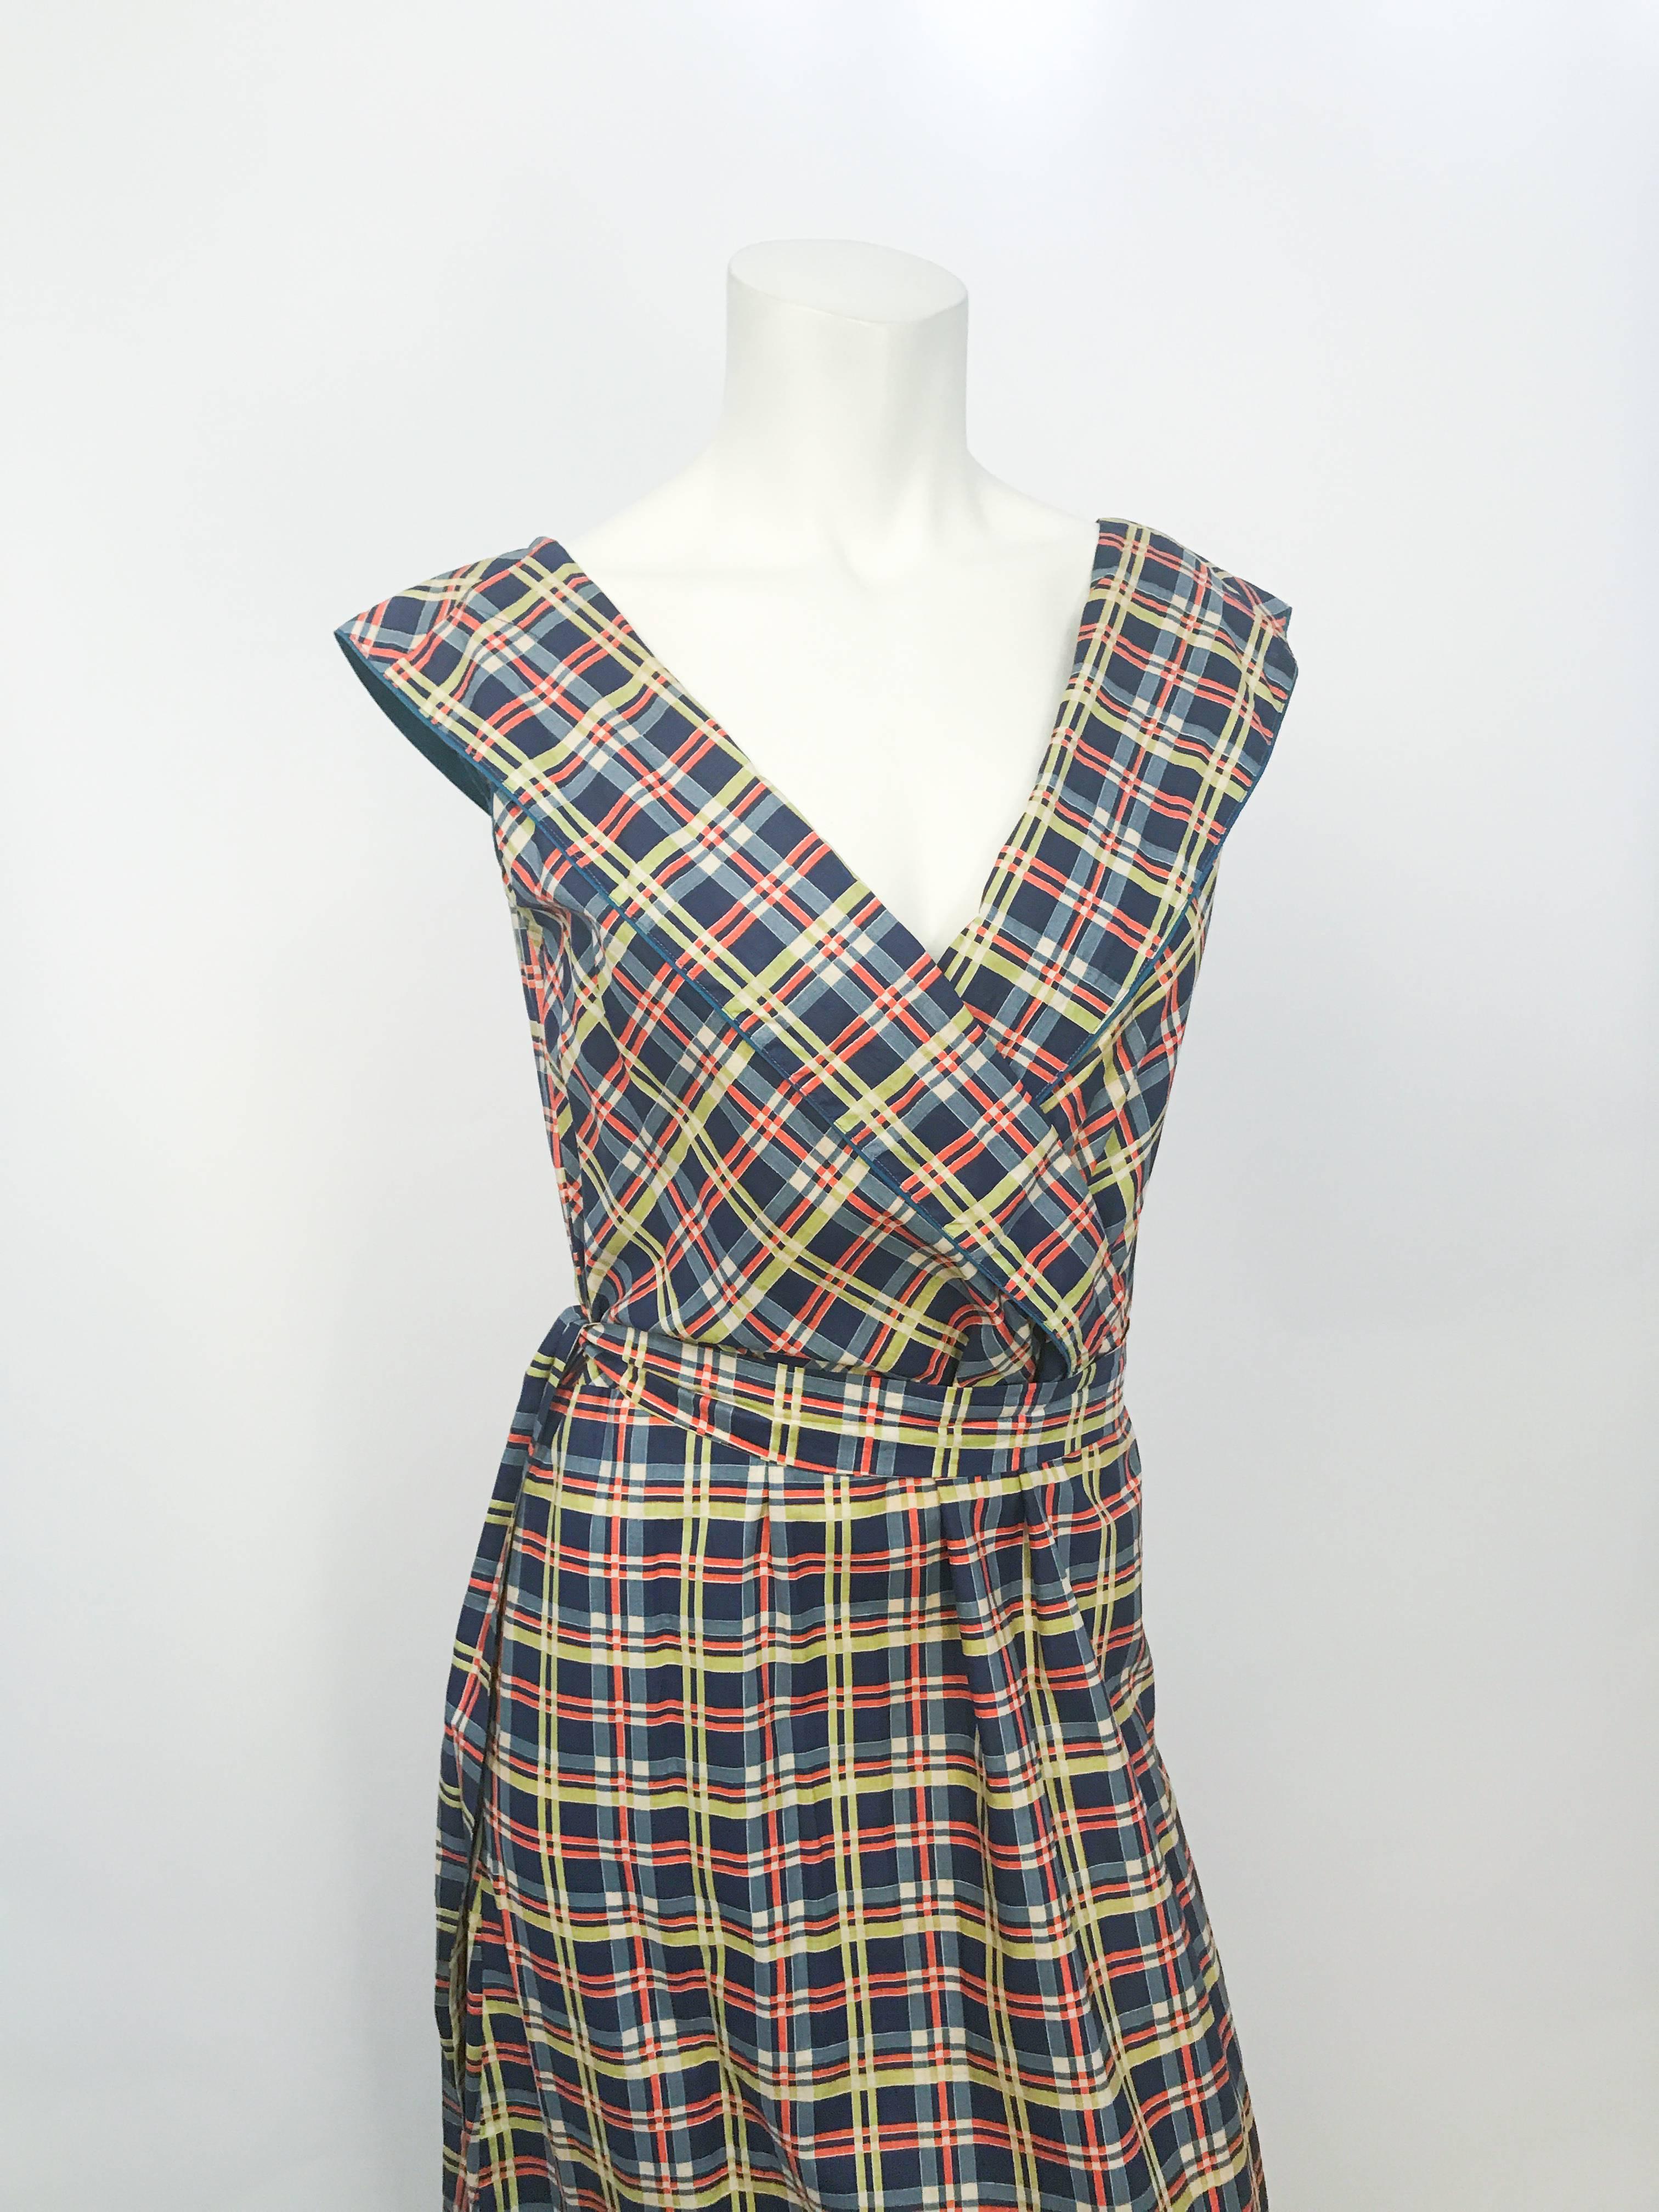 1930s Plaid Cotton Picnic Dress. Plaid cotton day dress with 2 tiers of ruffles at the hem. Frock. Surplice neckline, in a cornflower blue with matching sash. Goring also brings more fullness.